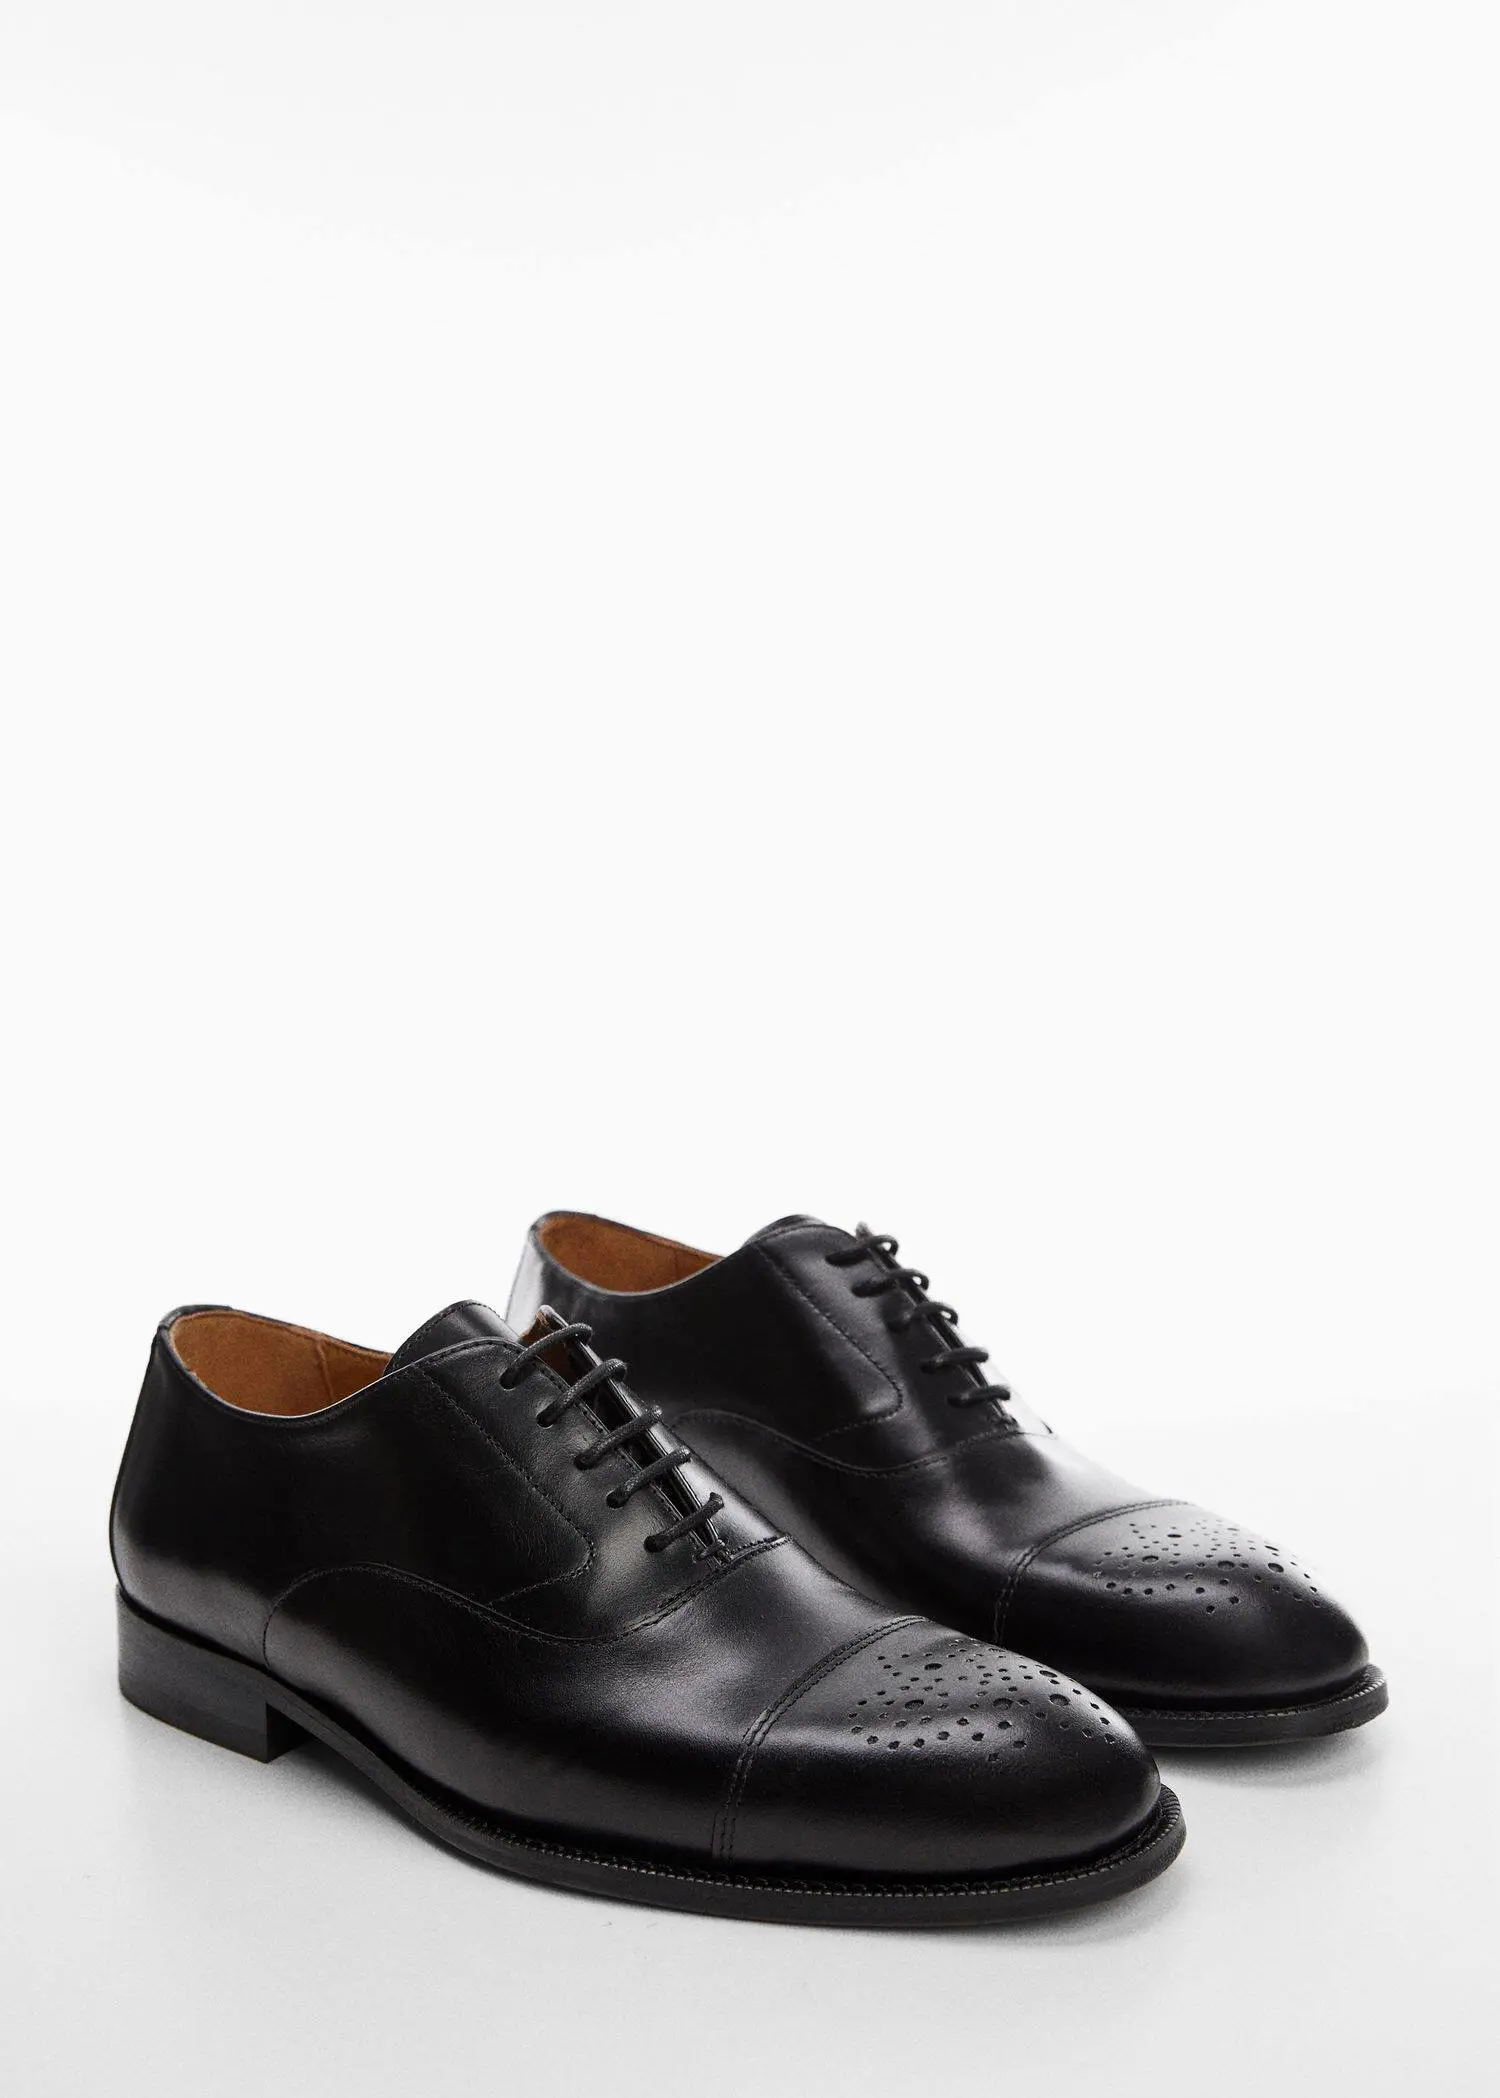 Mango Laser-cut leather blucher shoes. a pair of black dress shoes on a white surface. 